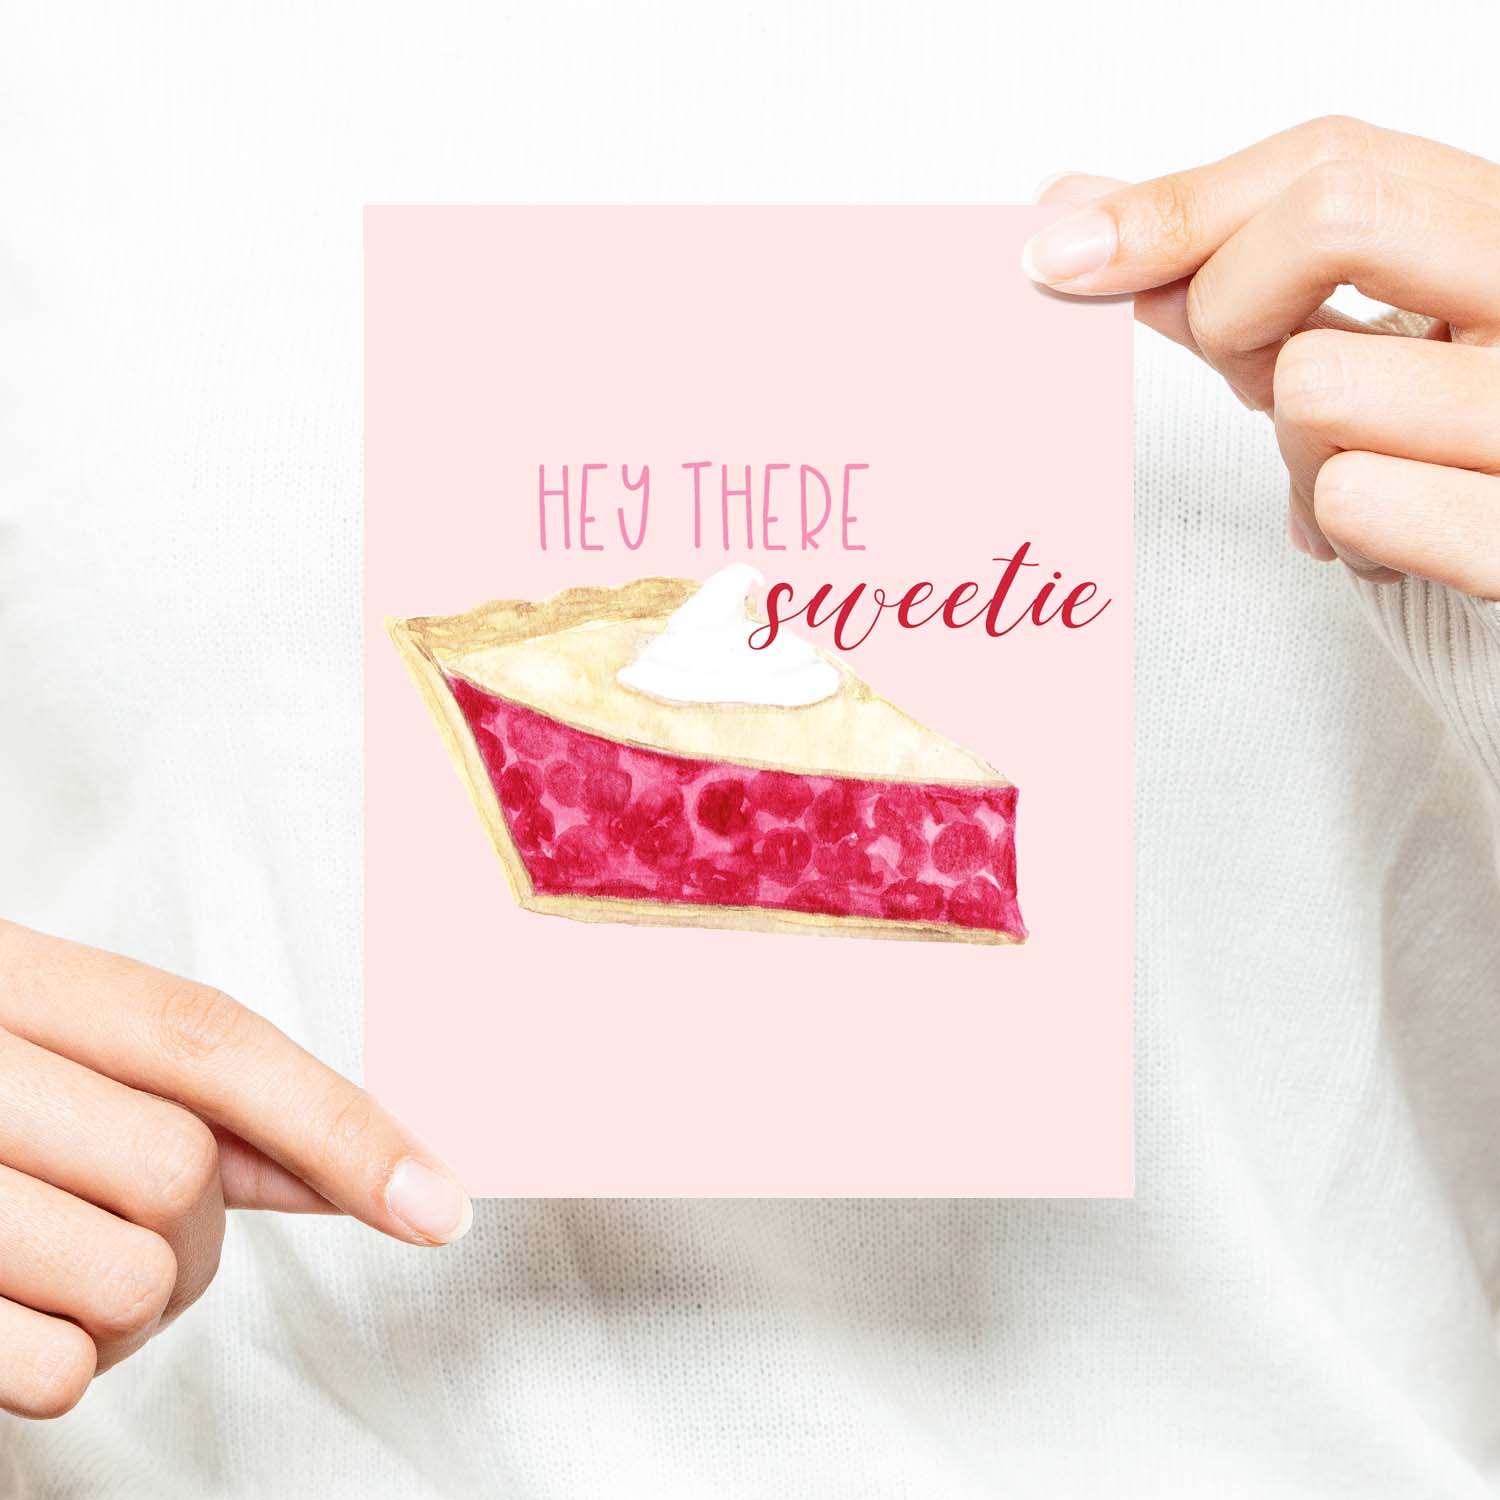 hey there sweetie watercolor greeting card with a watercolor slice of cherry pie topped with a dollop of whipped cream greeting card with white A2 envelope shown with a woman in a white sweater holding card